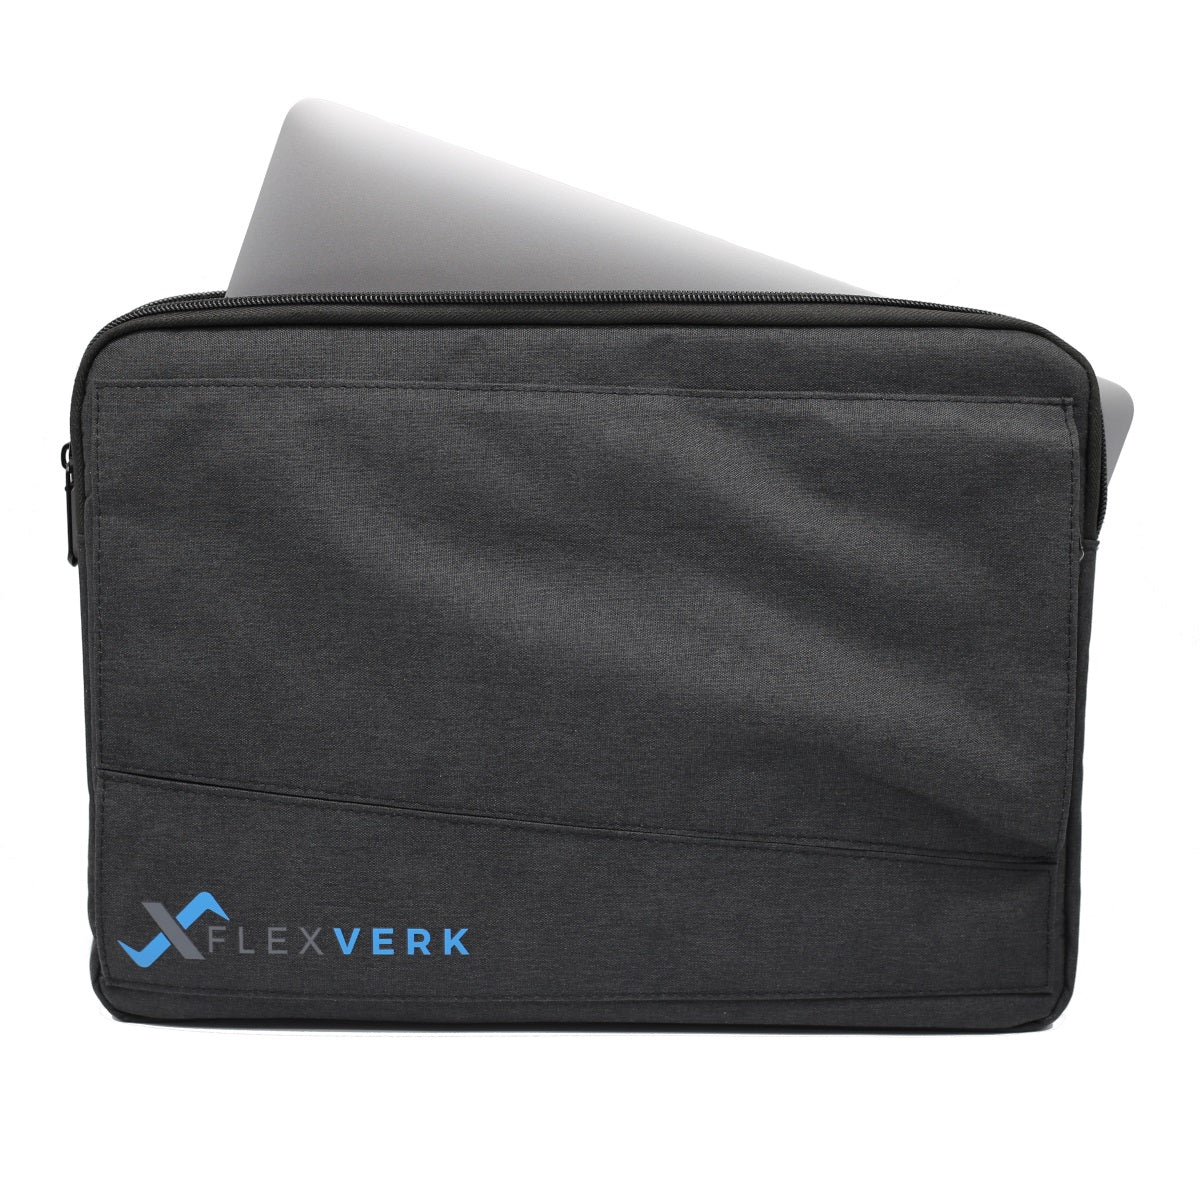 The FlexVerk Laptop Sleeve with a Macbook Air inserted to the main sleeve compartment on a white background.